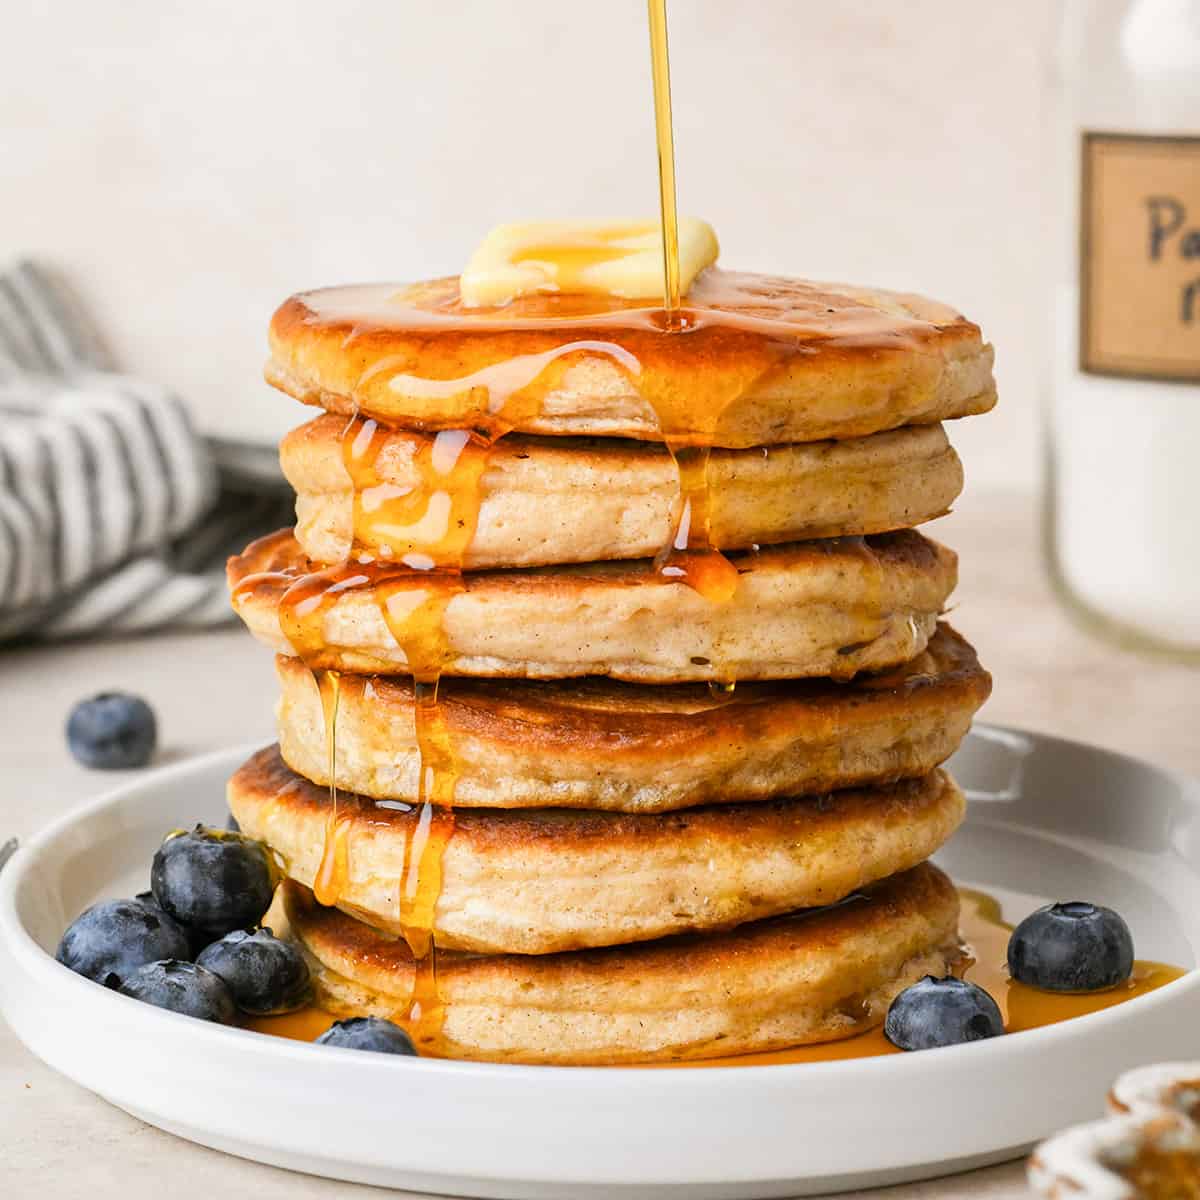 stack of 6 pancakes made with Homemade Pancake Mix topped with butter and syrup